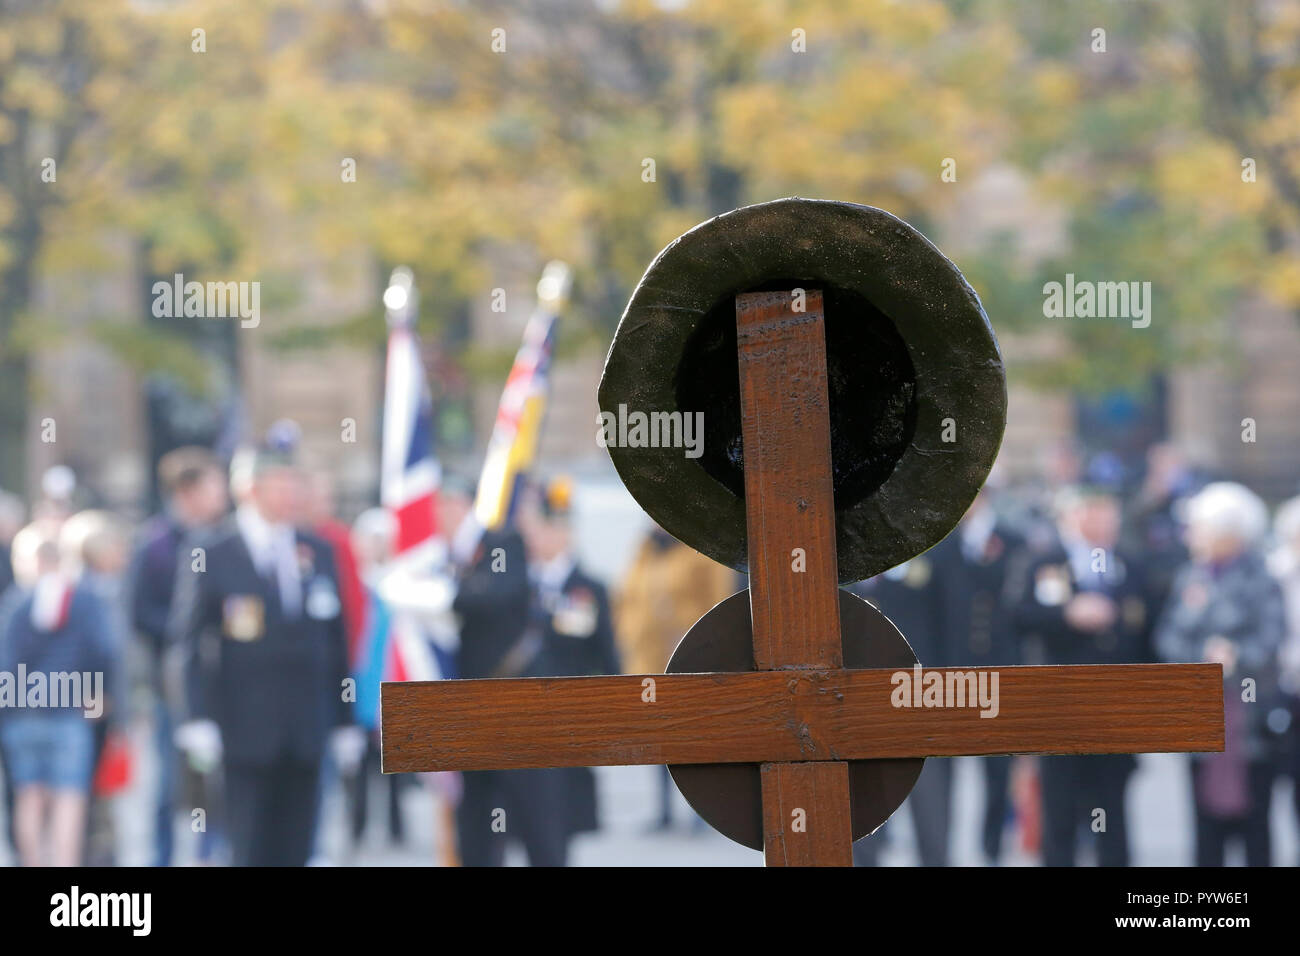 Glasgow, Scotland, UK. 30th October, 2018. Deputy Lord Lieutenant Mr Phil Green of the City of Glasgow led a special group of wreath-layers at the annual Opening Ceremony of the Glasgow Garden of Remembrance, in George Square. Members of the Armed Forces community including veterans attended the poignant event which marks the start of the traditional two week Remembrance period. Credit: Findlay/Alamy Live News Stock Photo